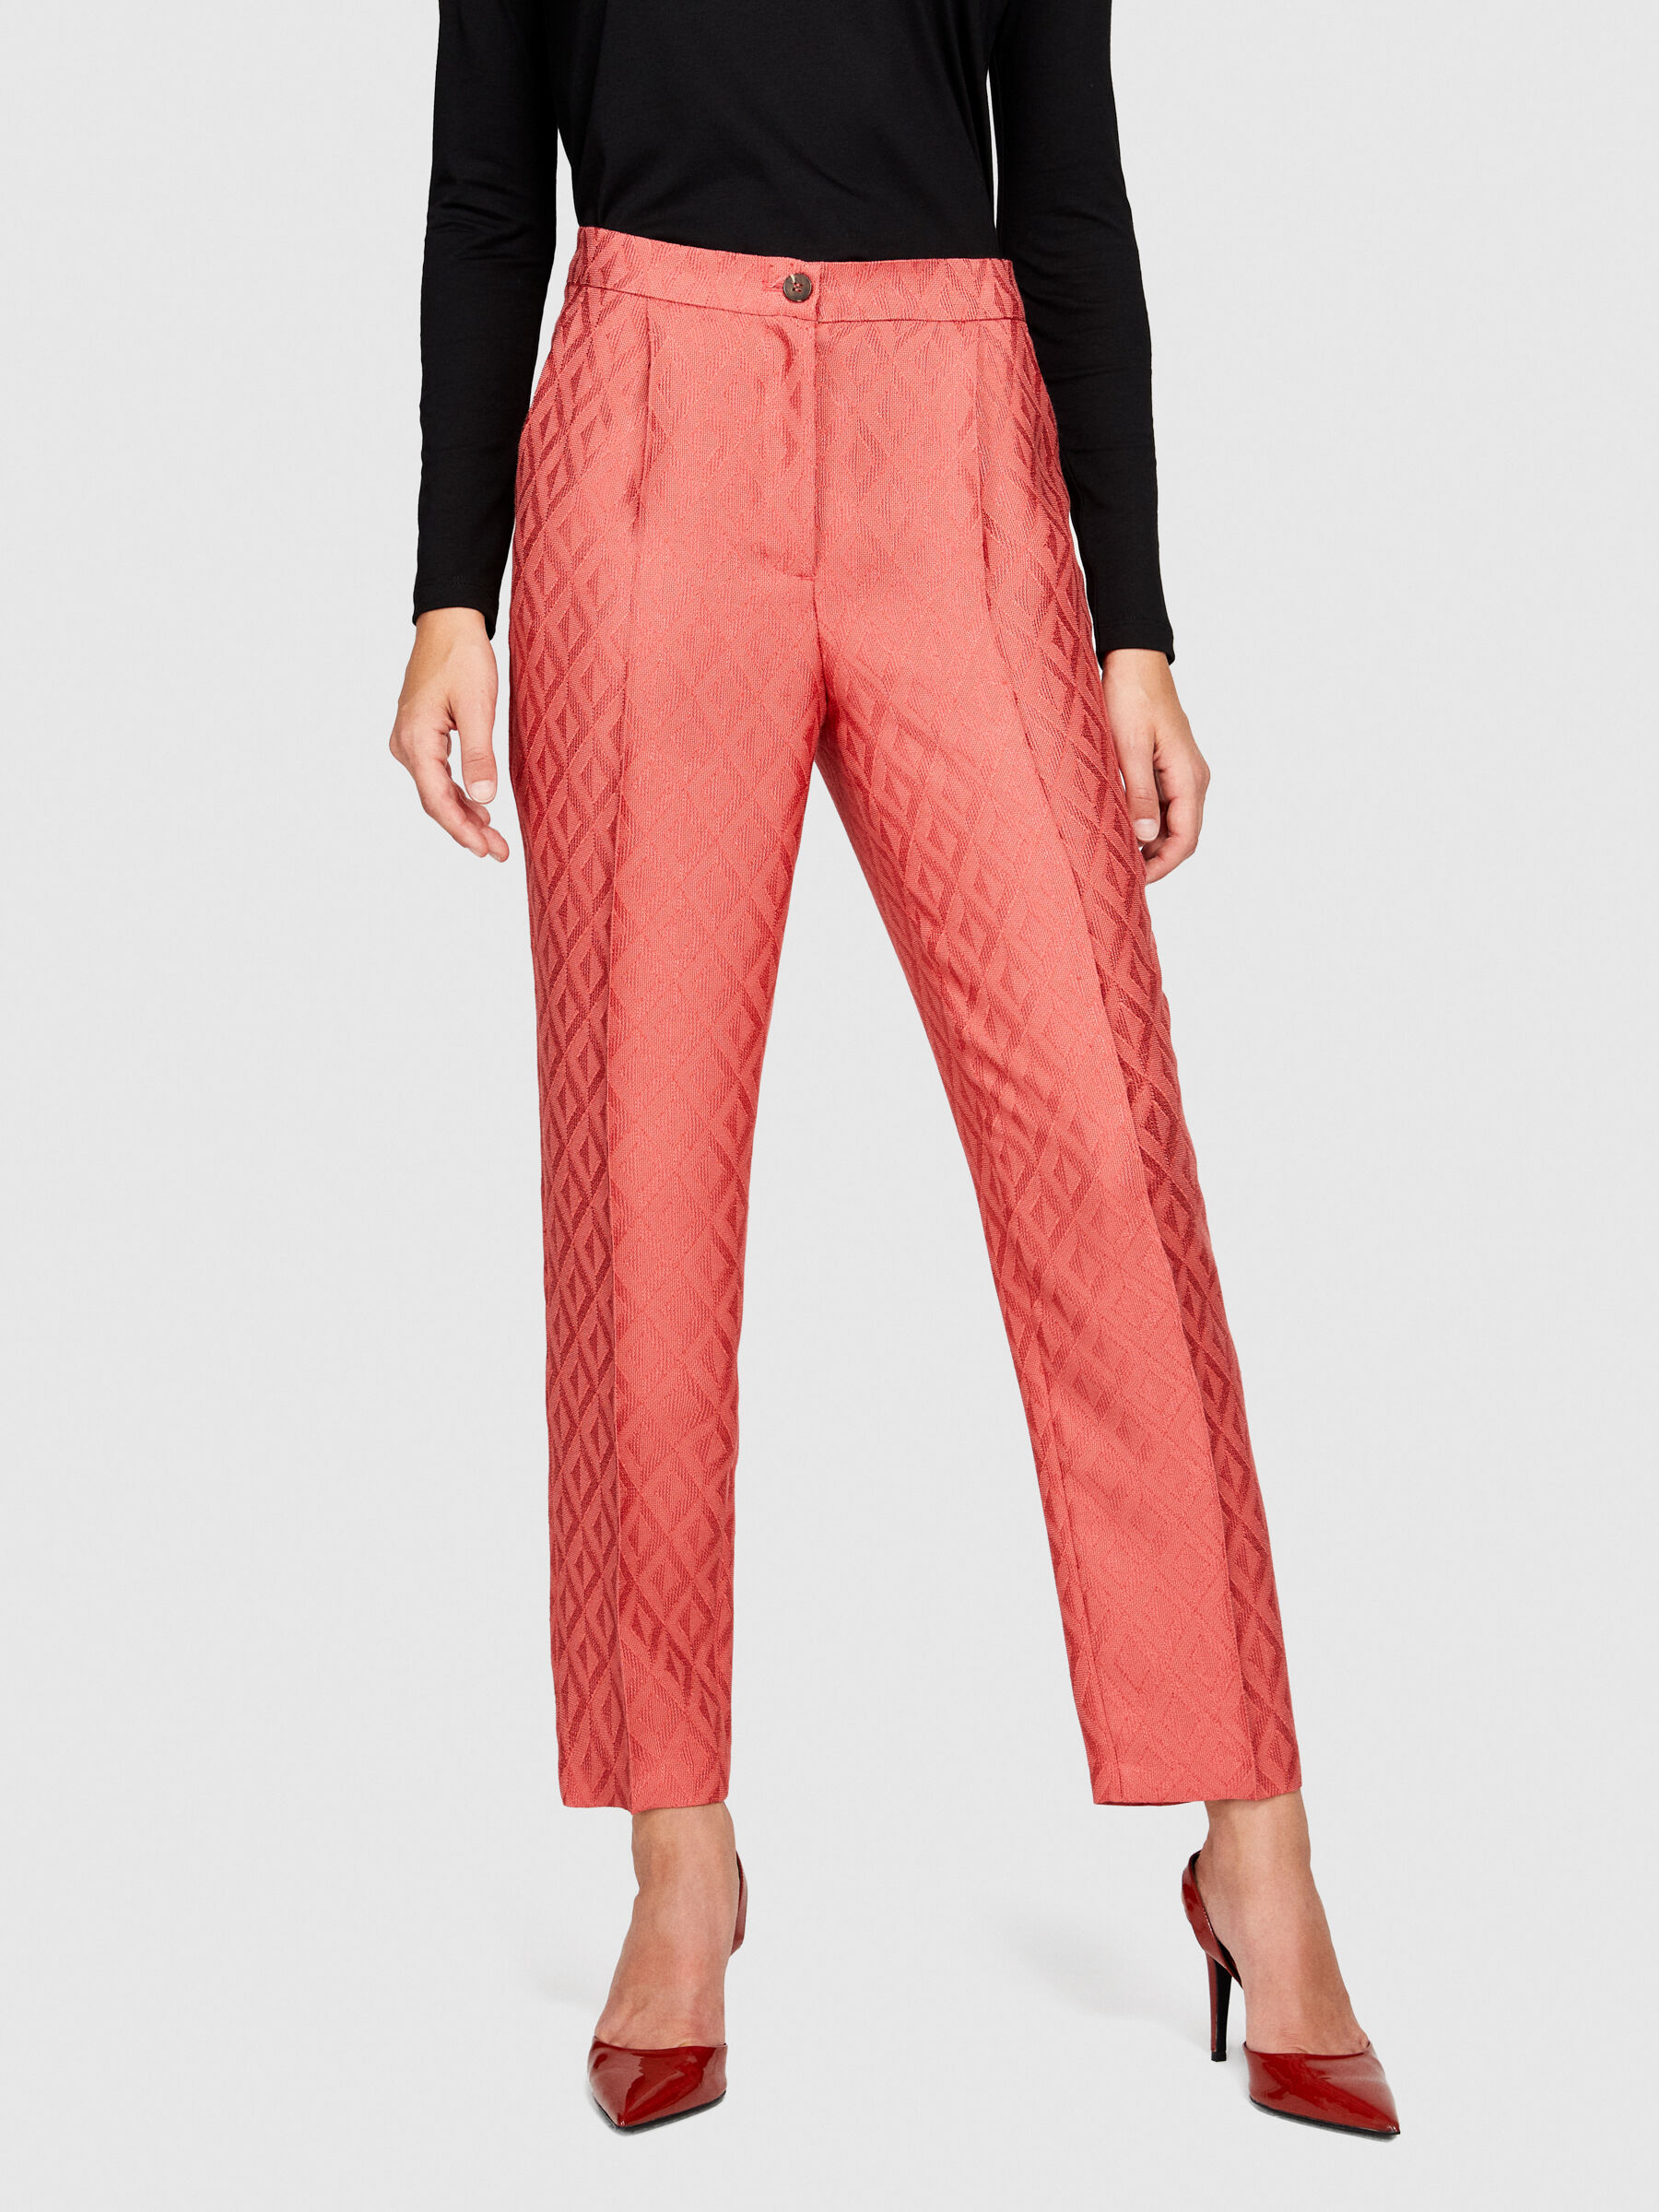 Update more than 129 womens jacquard trousers